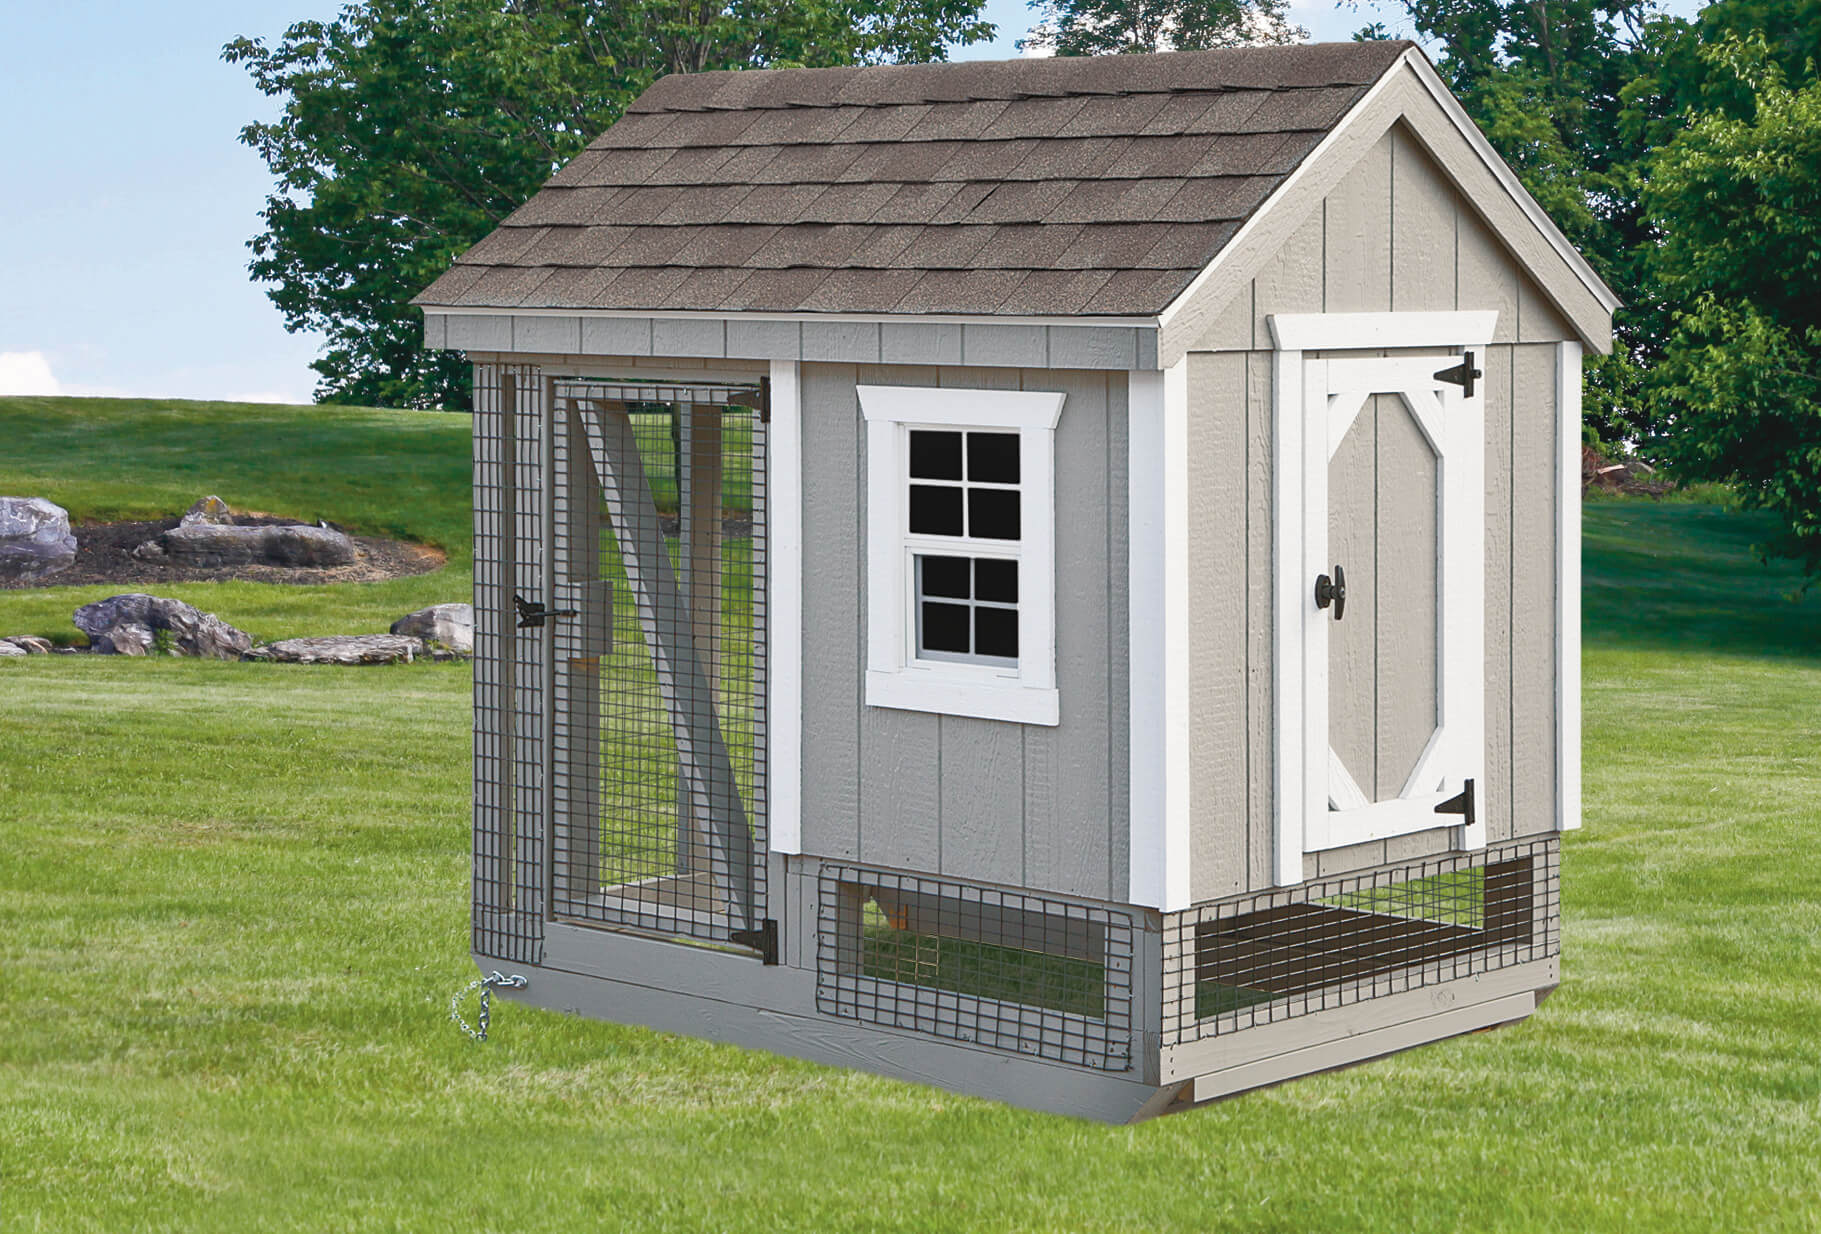 Exterior of a 4x6 A-Frame Combination chicken coop